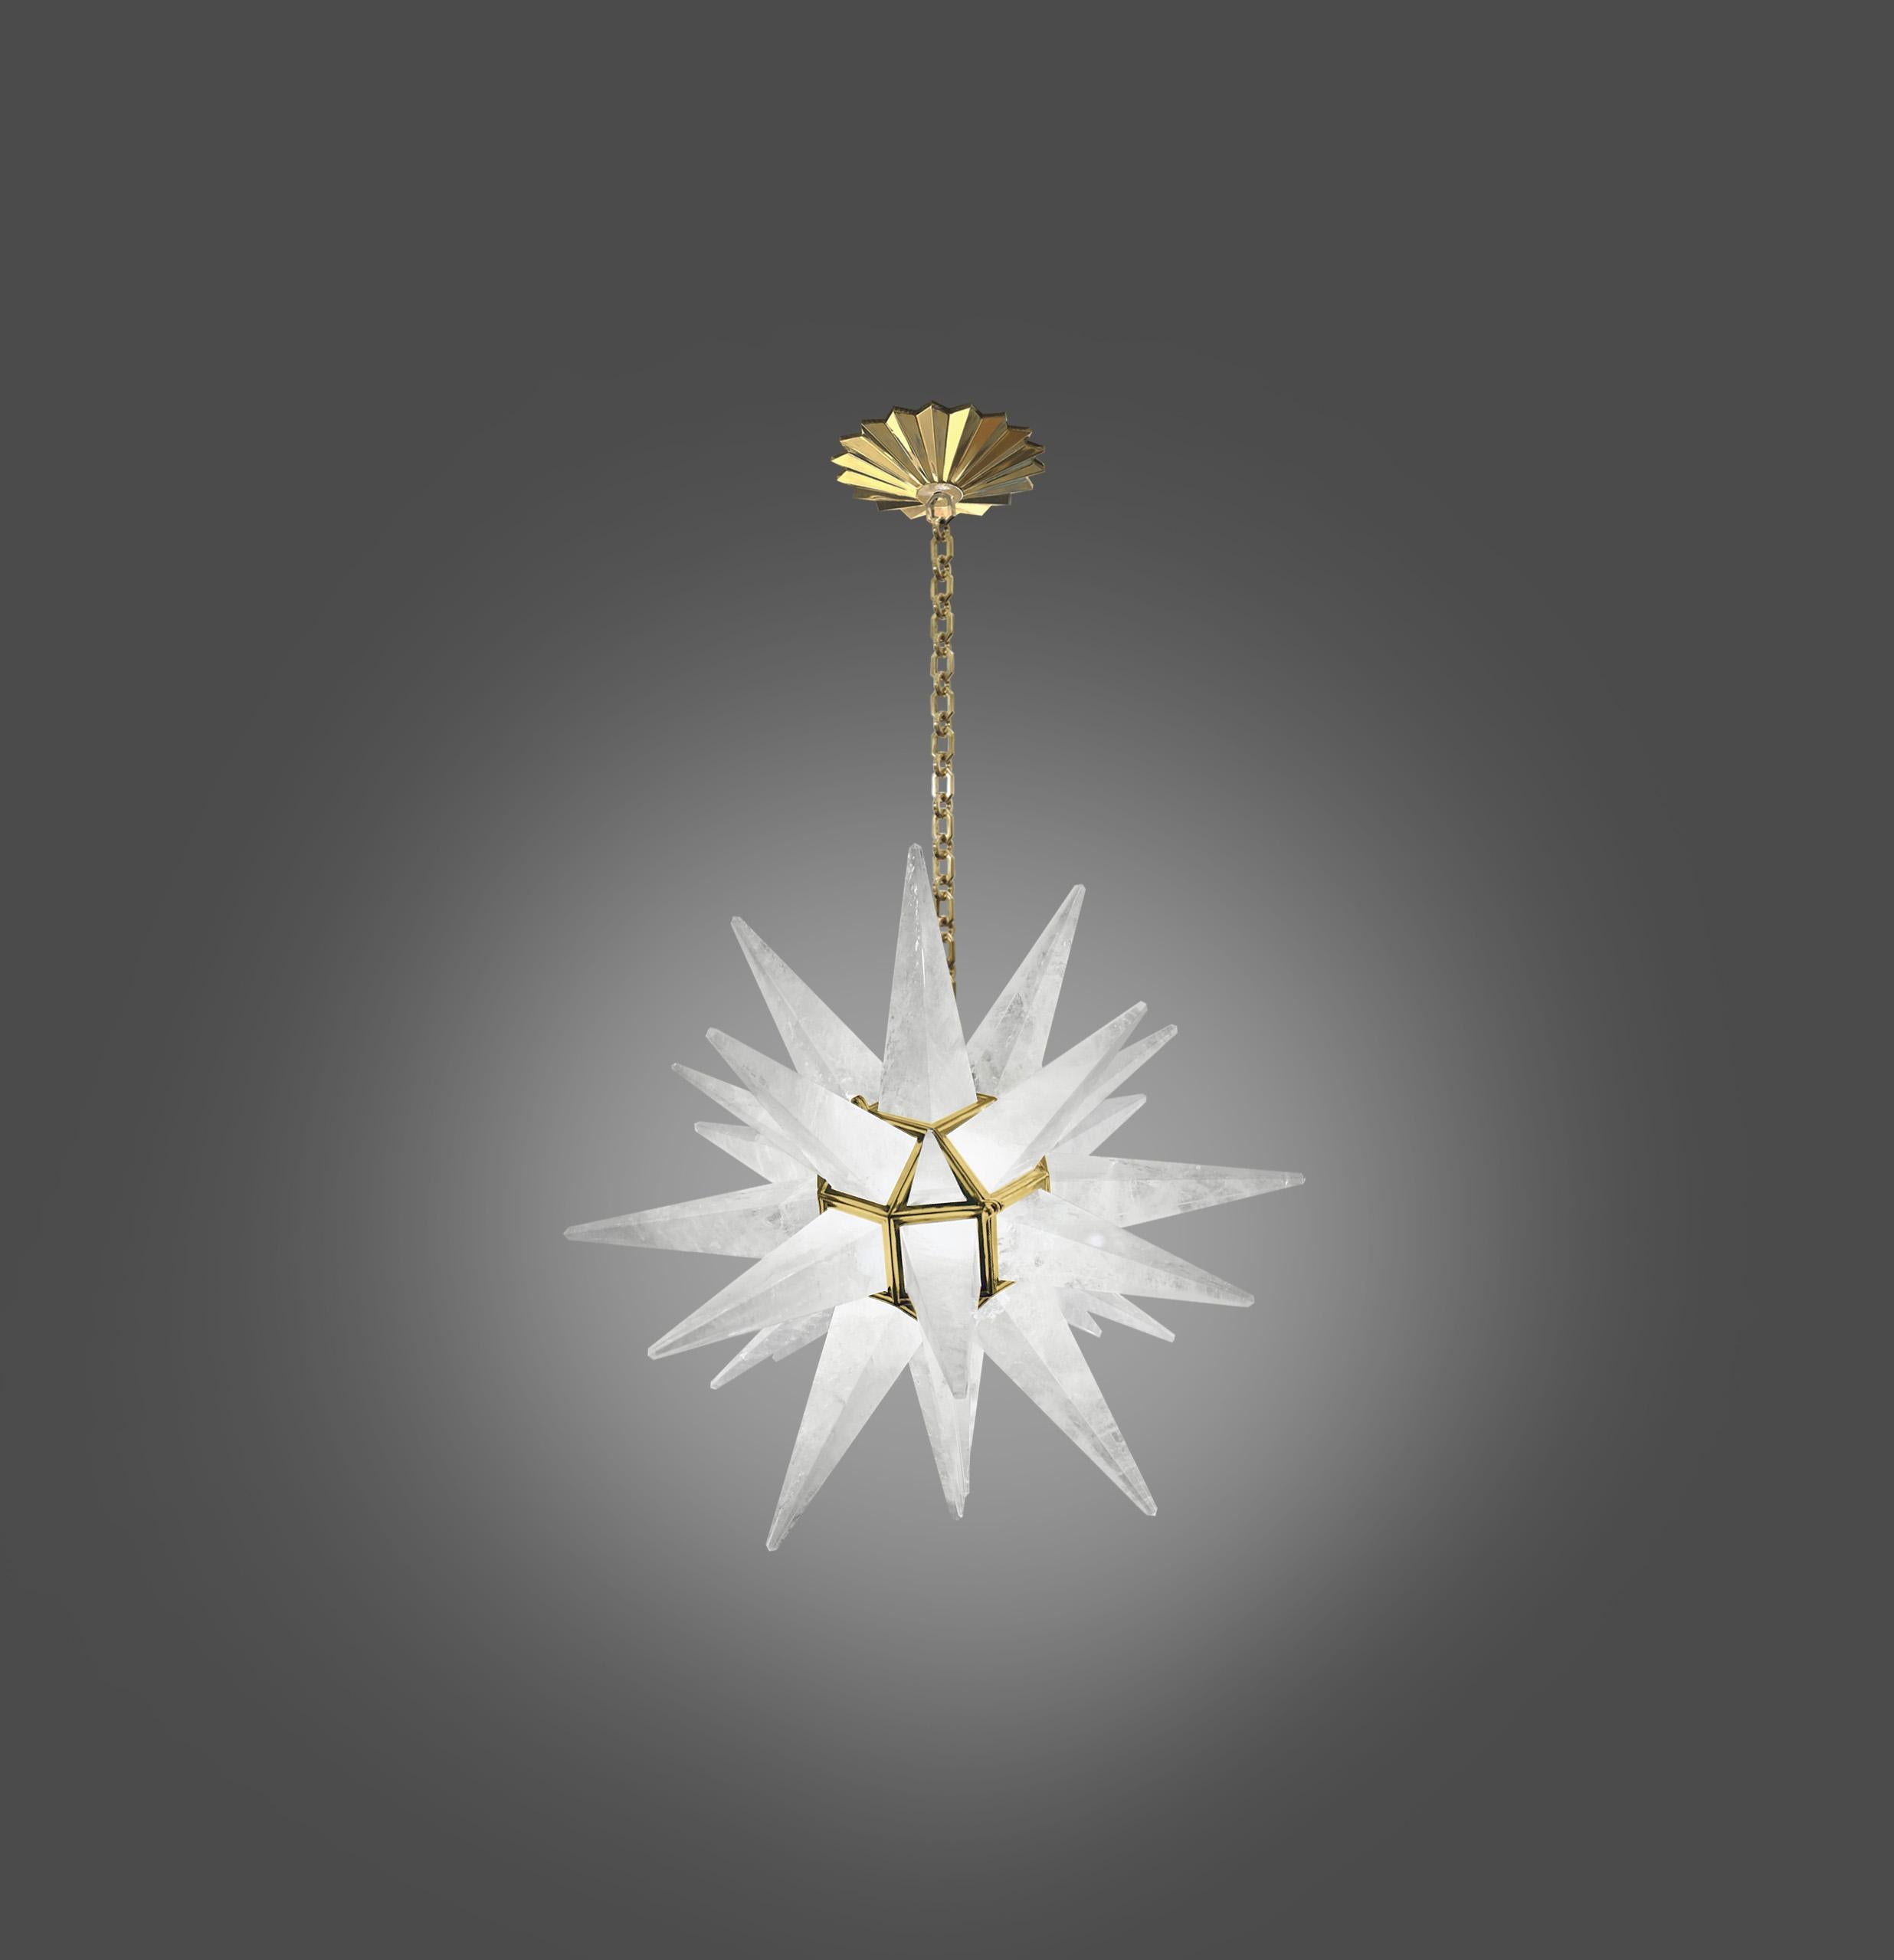 Deco style star forms rock crystal chandelier with polished brass frame. Created by Phoenix Gallery, NYC. 
2 sockets installed. Use two 100 watts led warm light bulbs. The total is 200 watts. The metal finish available in polished nickel and